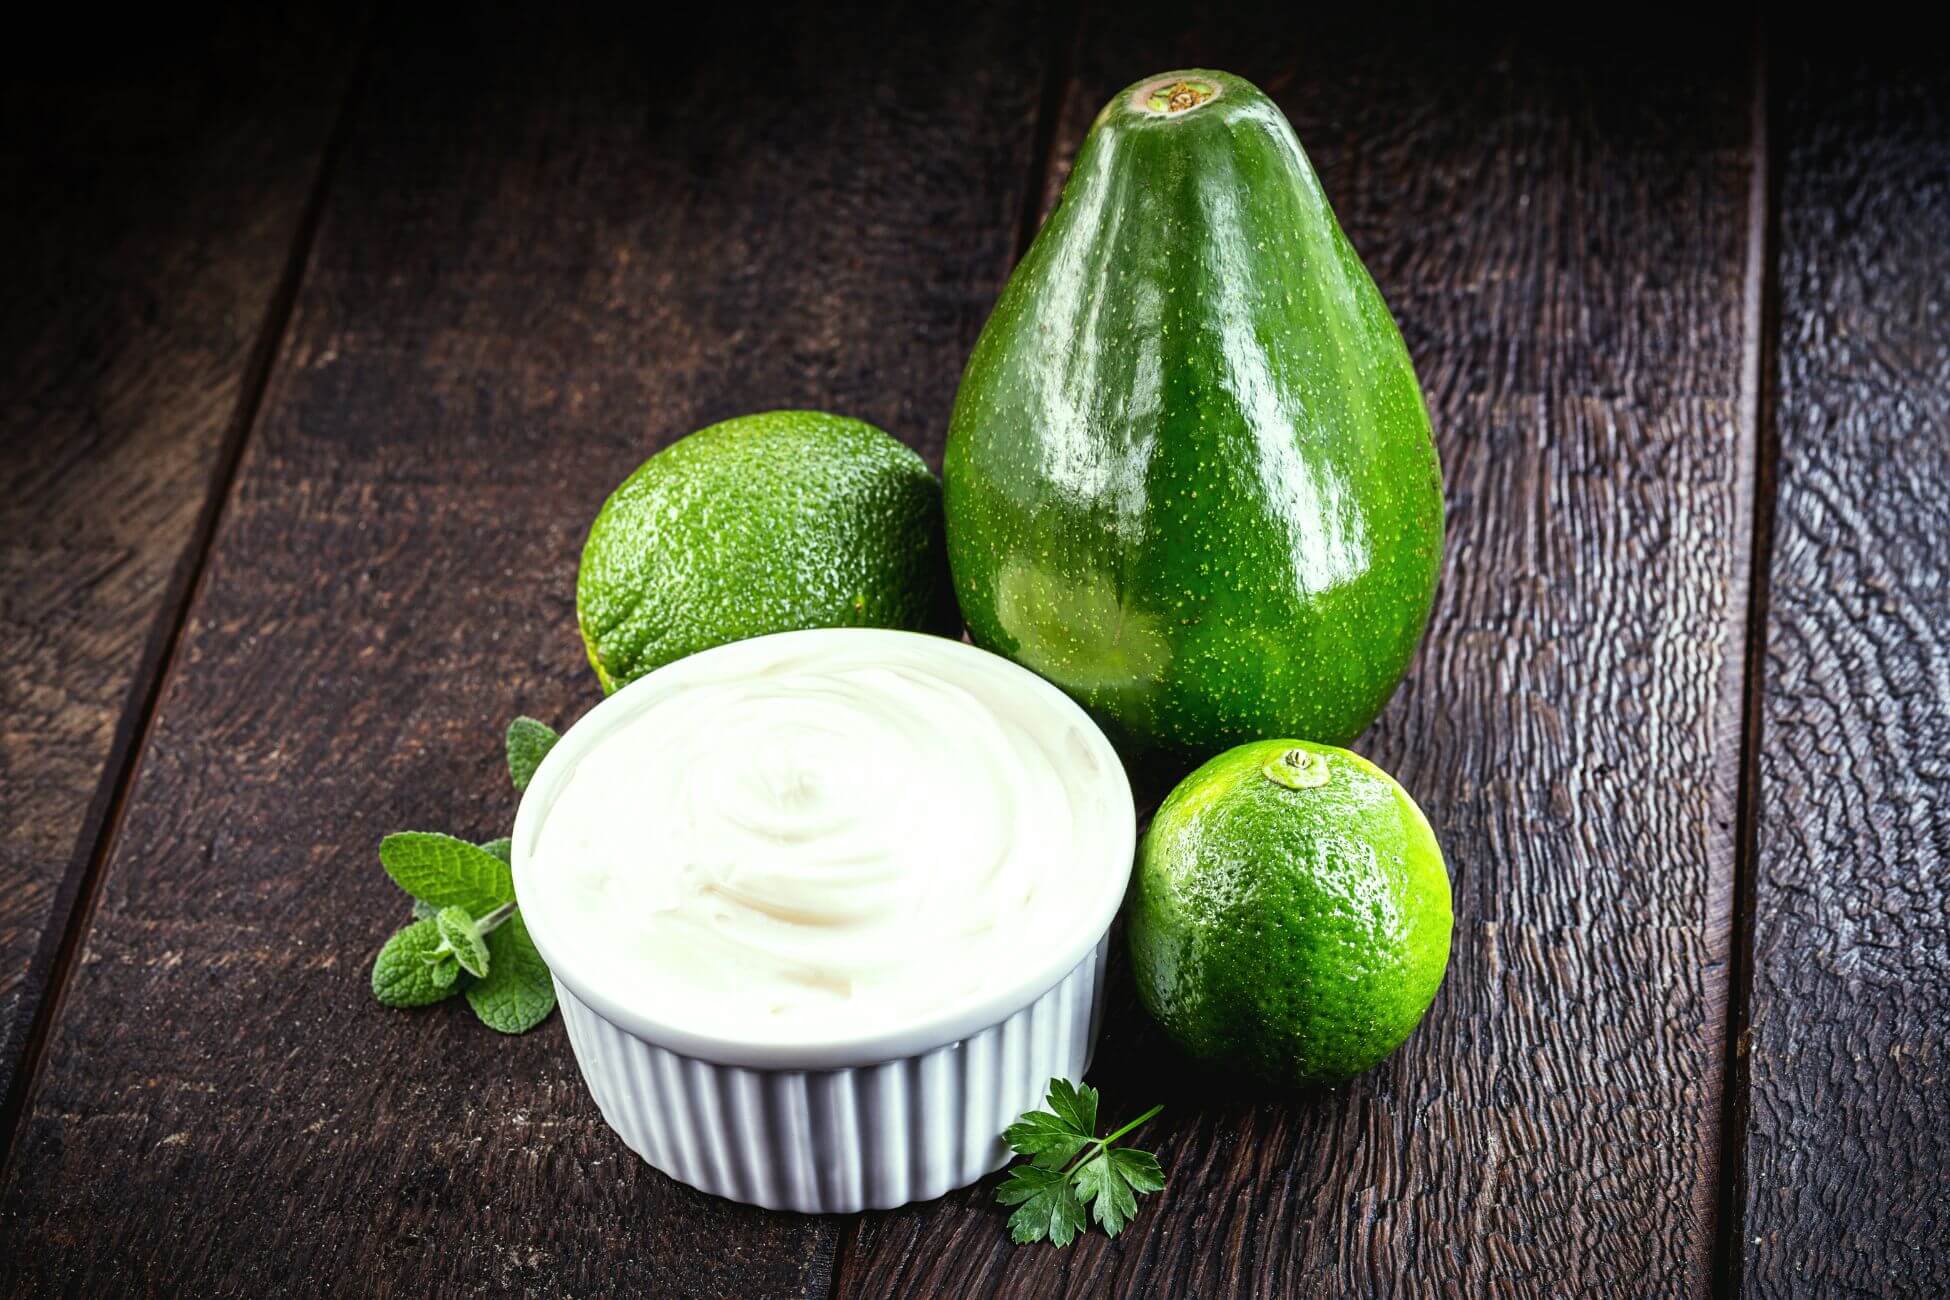 A bowl of creamy white avocado mayonnaise sits on a wooden surface alongside a whole avocado, two limes, and fresh mint and parsley leaves.